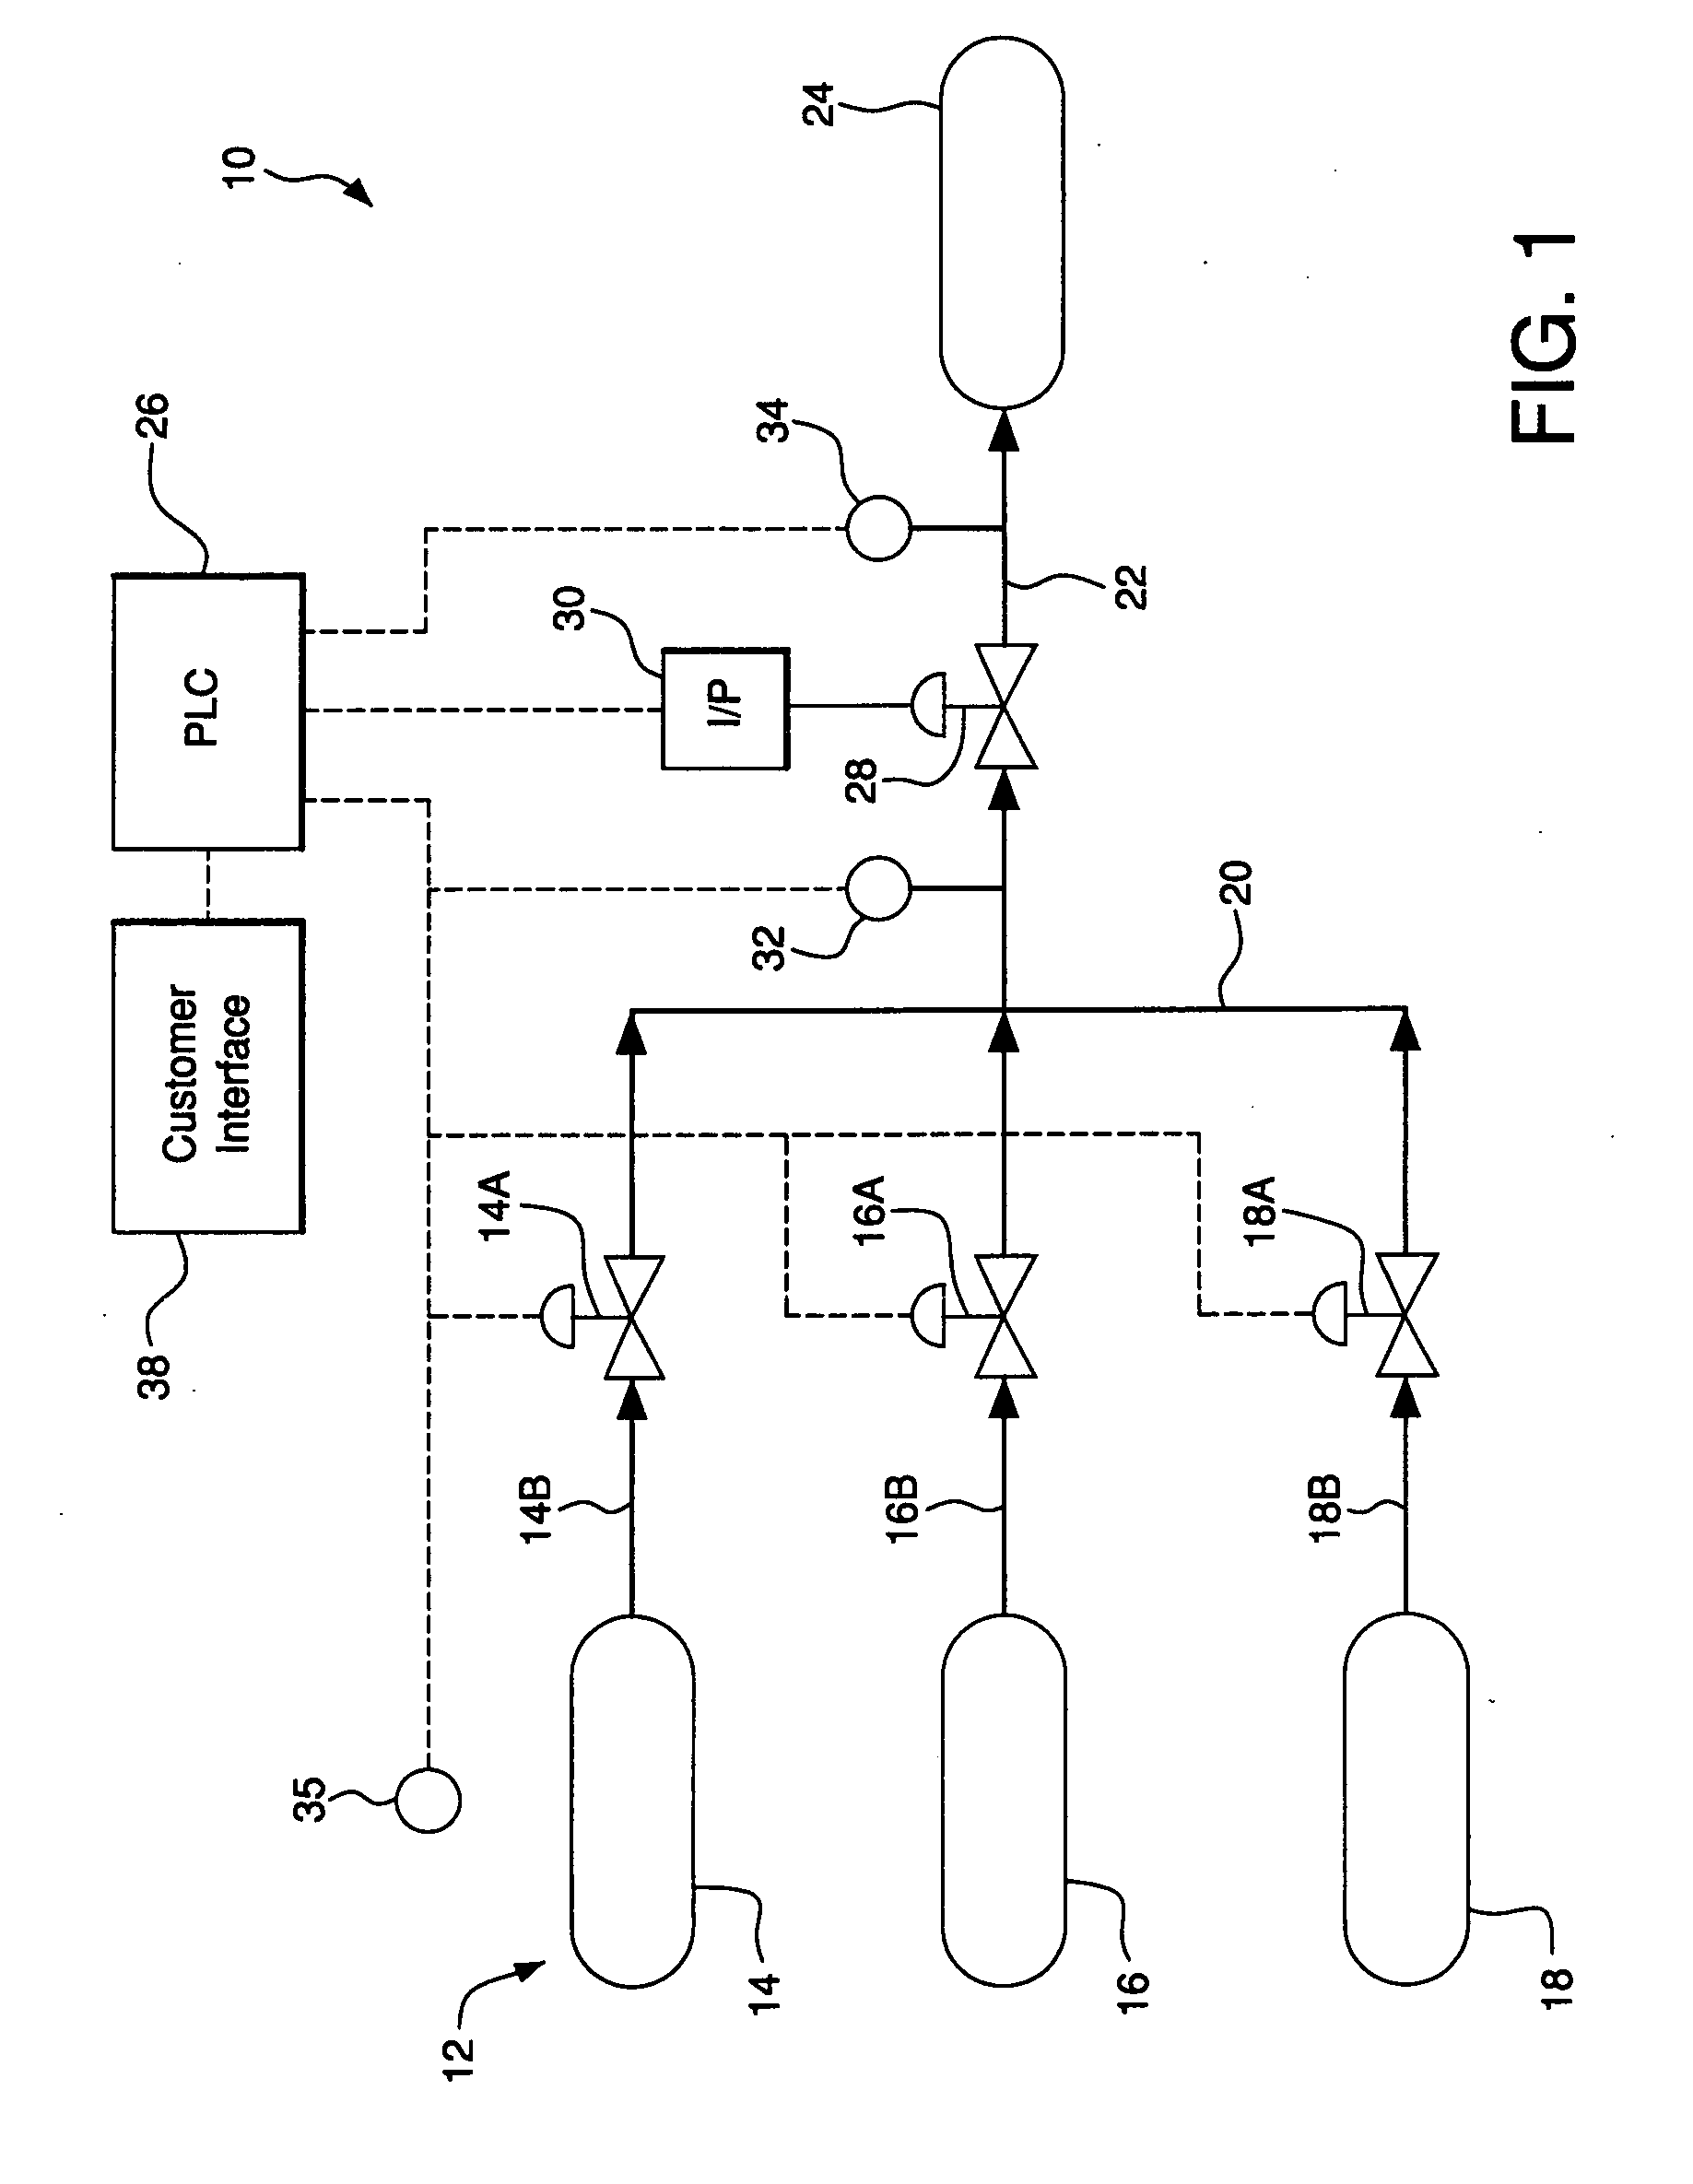 Diagnostic method and apparatus for a pressurized gas supply system